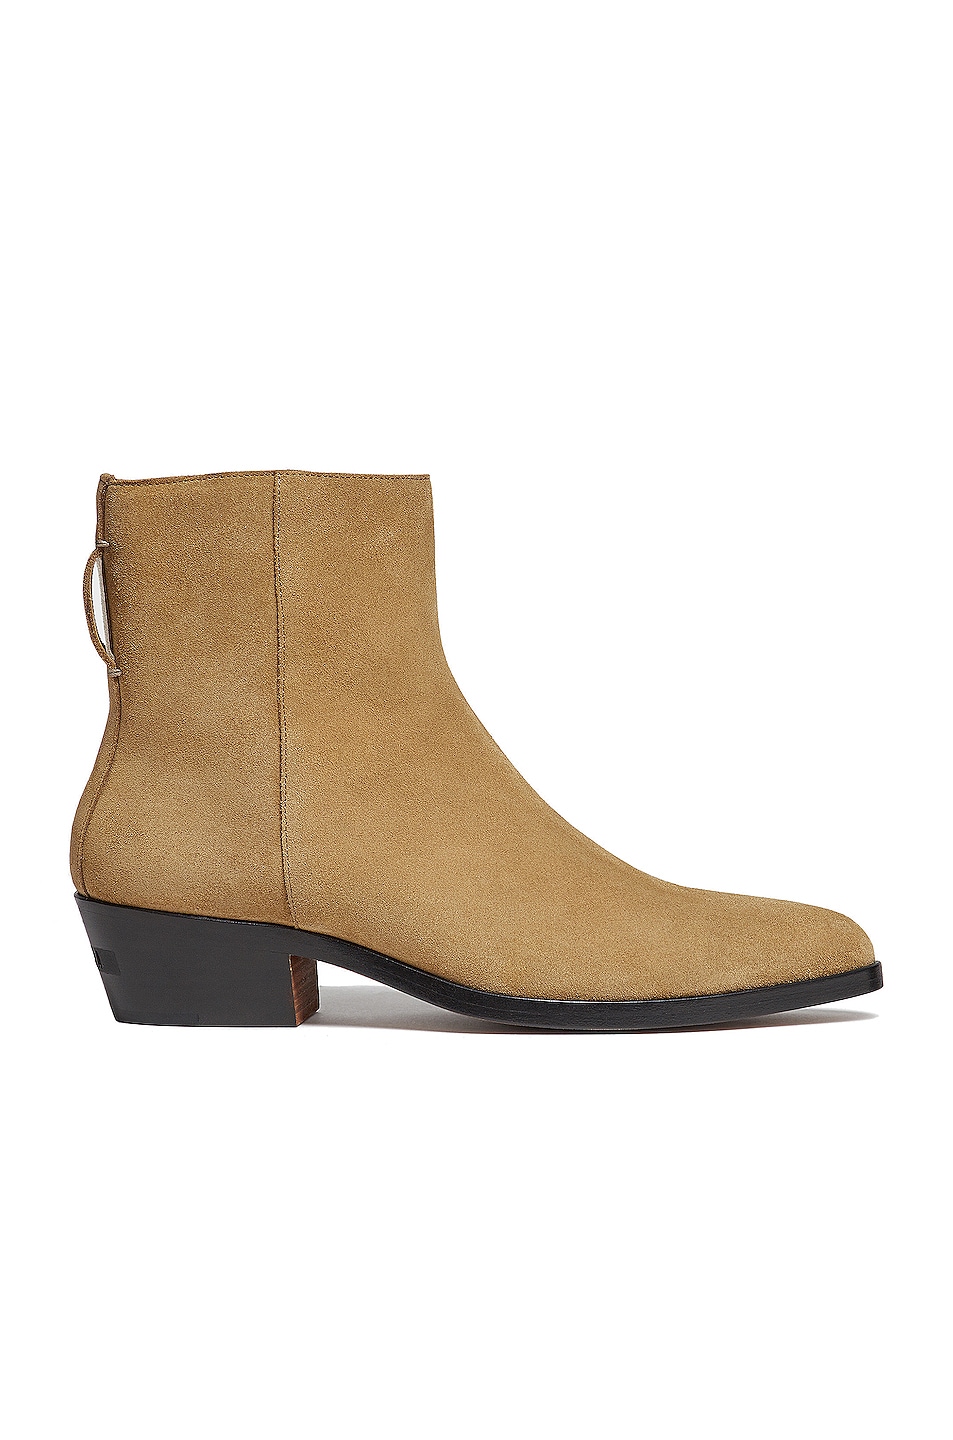 Image 1 of Fear of God Exclusively for Ermenegildo Zegna Suede Leather Texan Boot in Camel